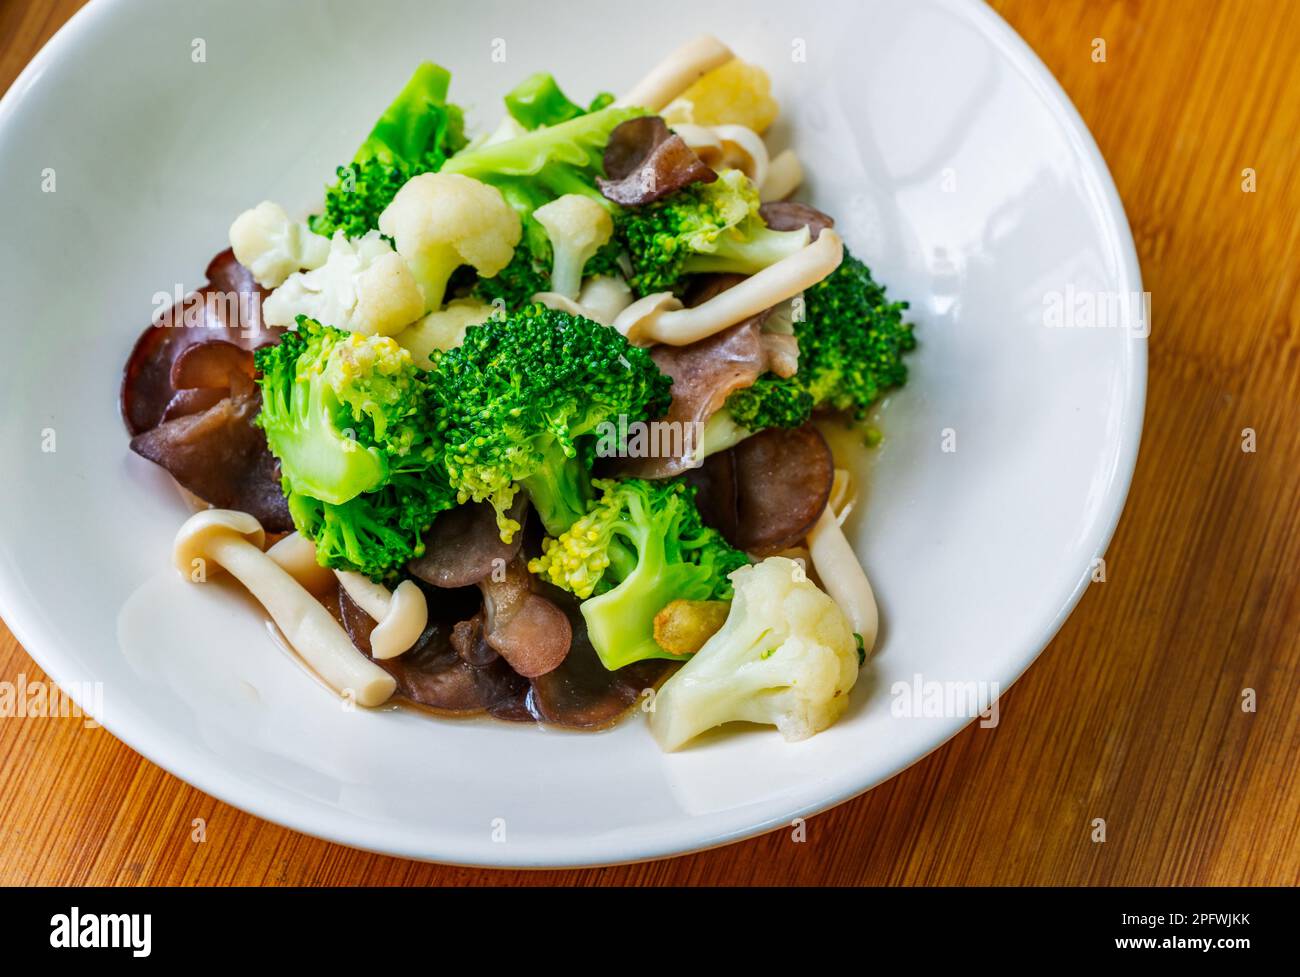 Healthy food menu, stir-fried mushrooms, cauliflower, and broccoli, Thai healthy mix vegetable food on a white plate. Close-up image, view from above. Stock Photo